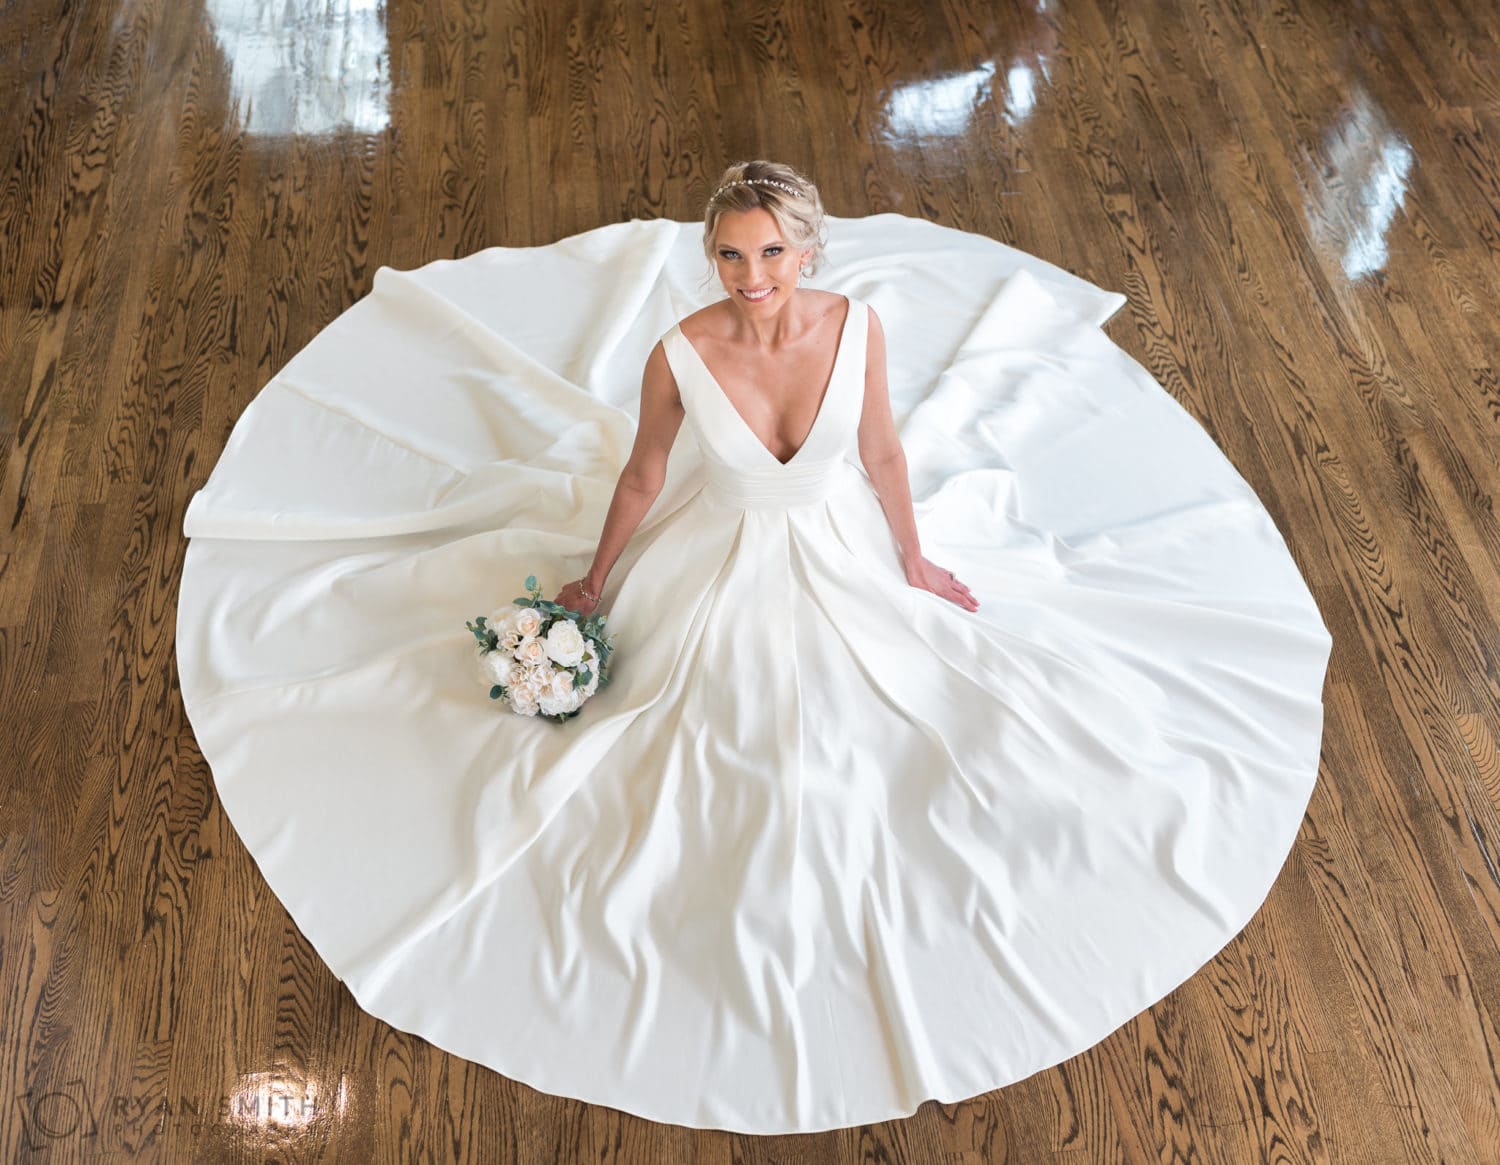 Bride with dress flowing around her looking up - Pine Lakes Country Club